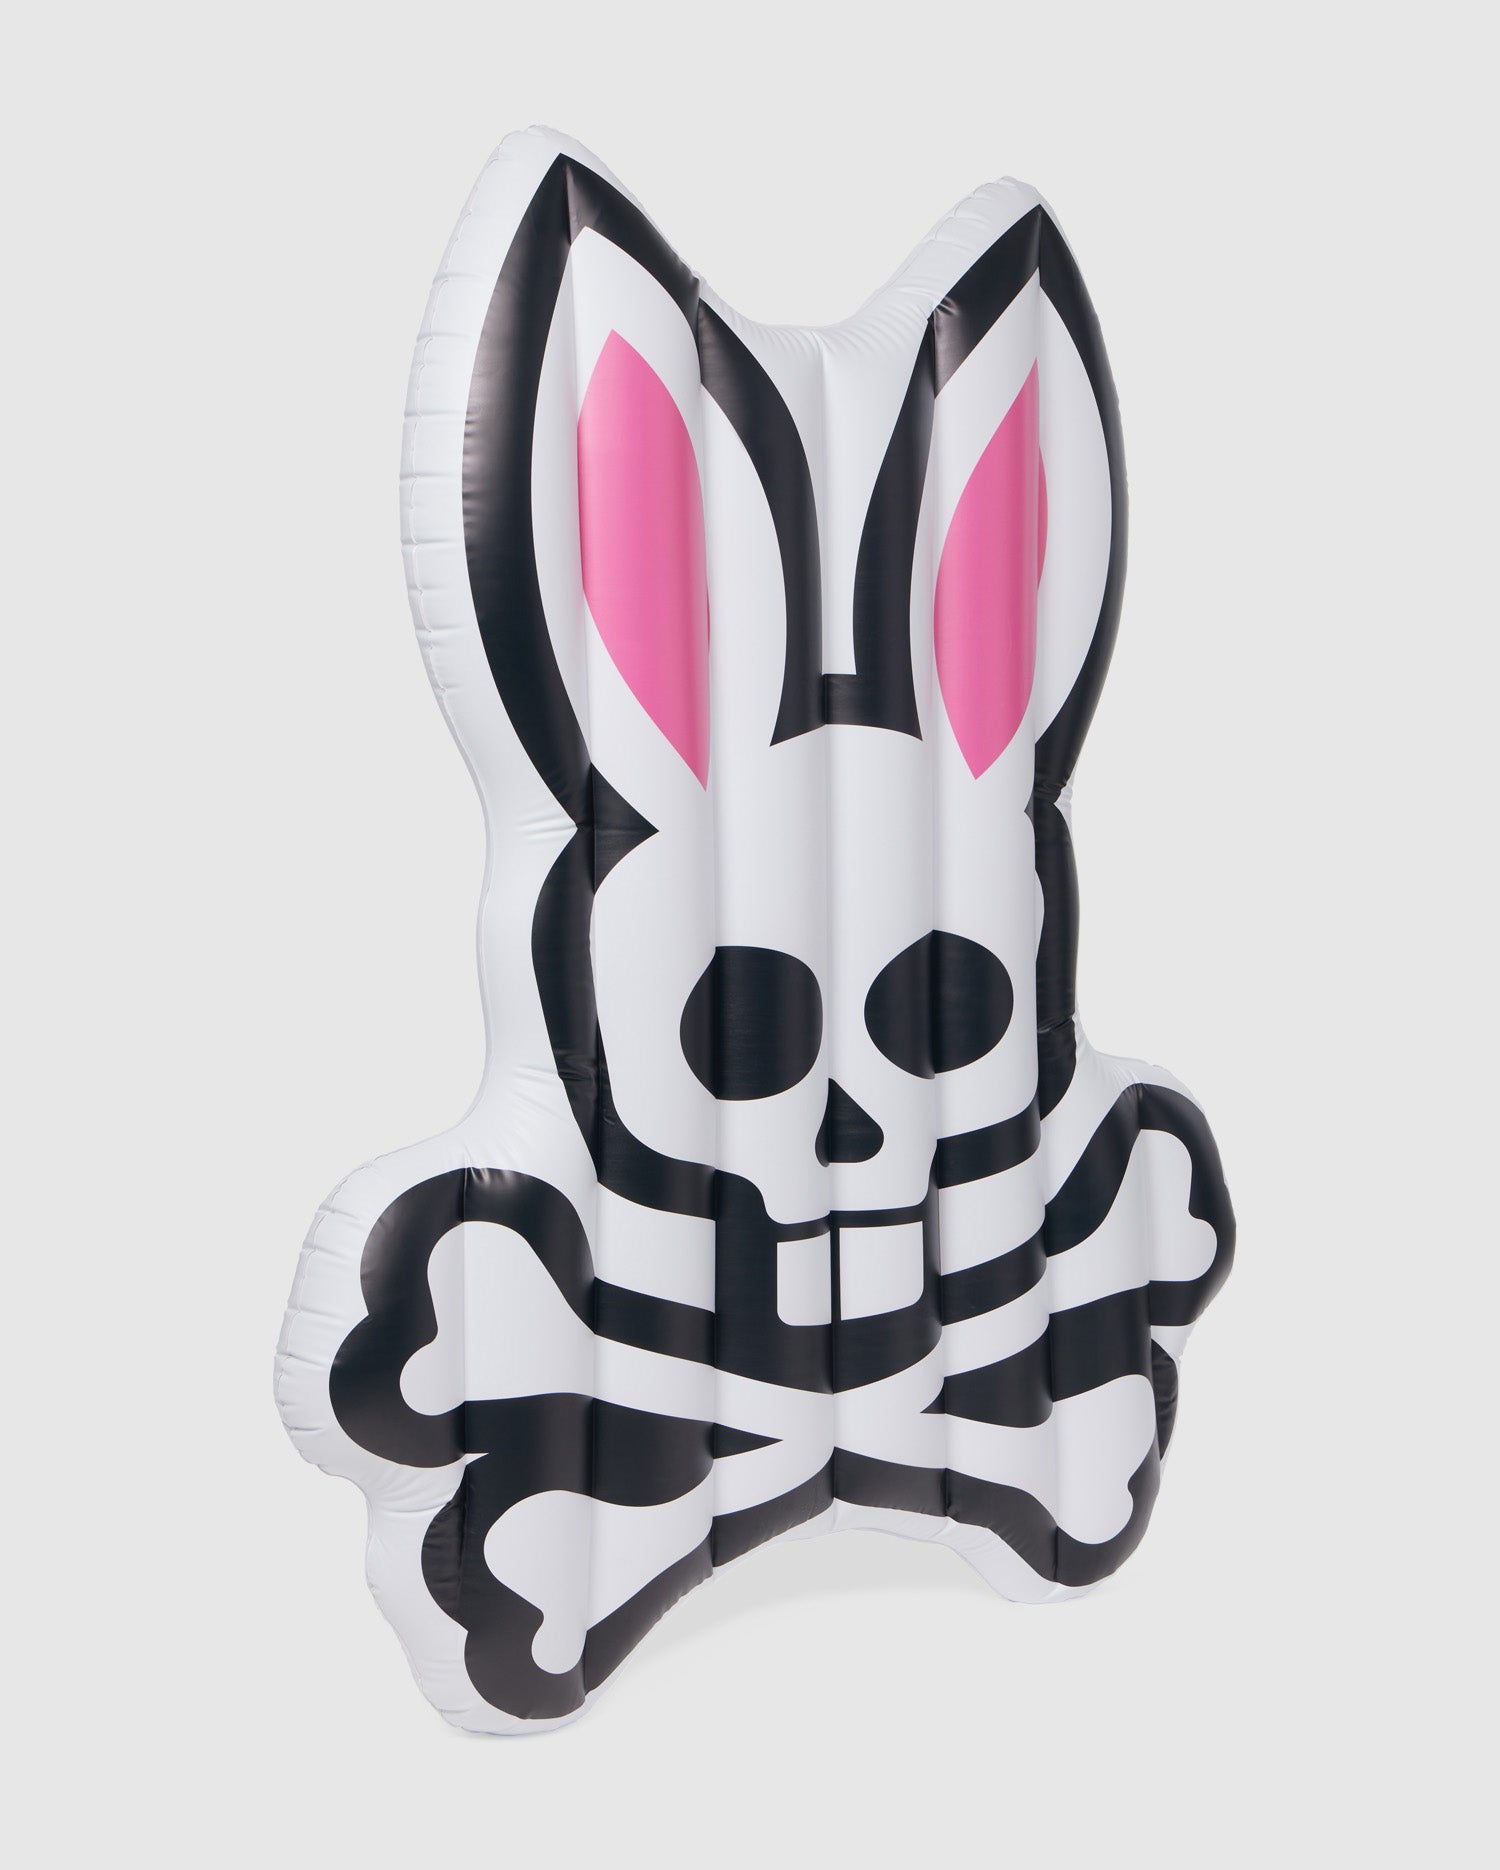 An inflatable pool floatie shaped like a bunny with a skull and crossbones design. The bunny's ears are pink inside, and the overall color is white with black and pink details. This Psycho Bunny POOL FLOATIE - B6A386B200 is perfect for your resort vacation, adding both fun and flair to your poolside relaxation.